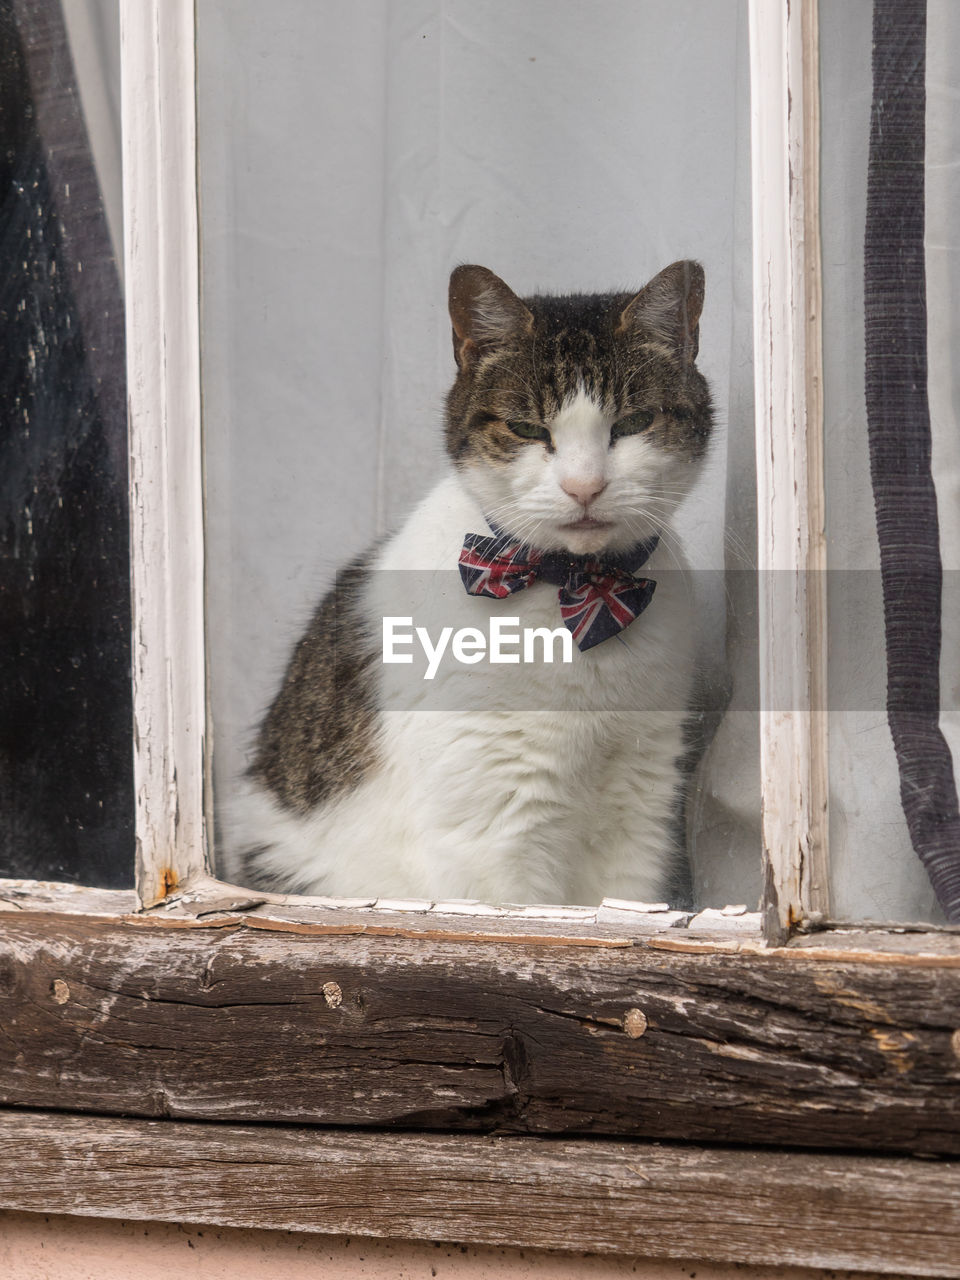 Dapper cat with a union jack bow tie sitting in a medieval cottage window. england, uk.